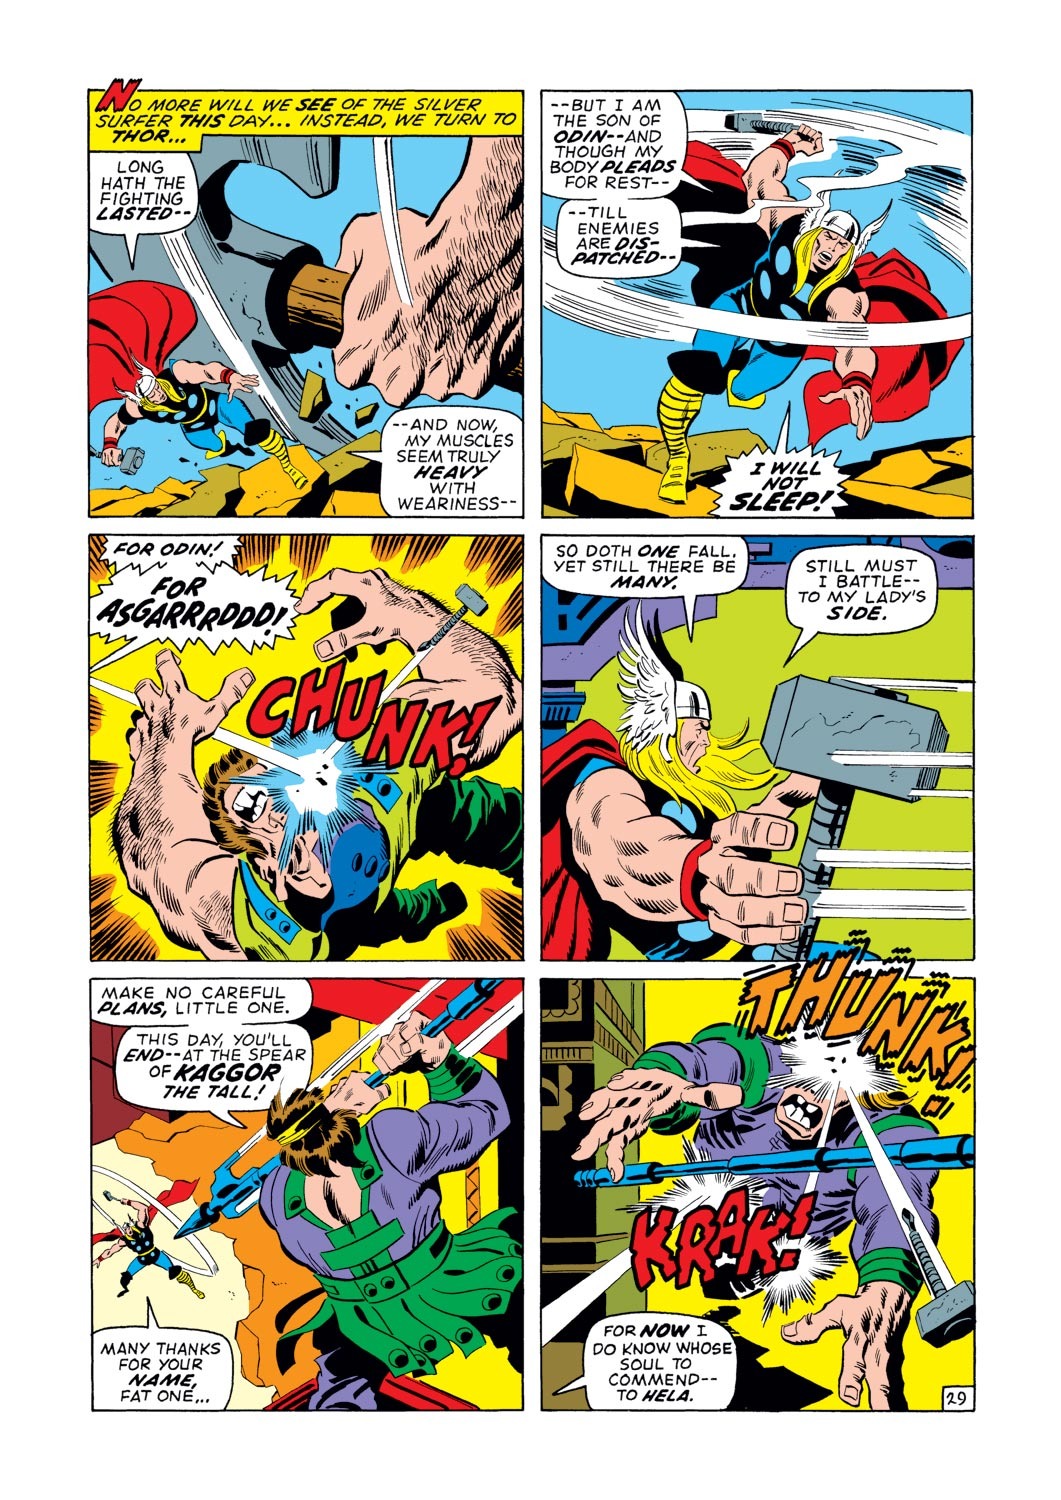 Thor (1966) 193 Page 29